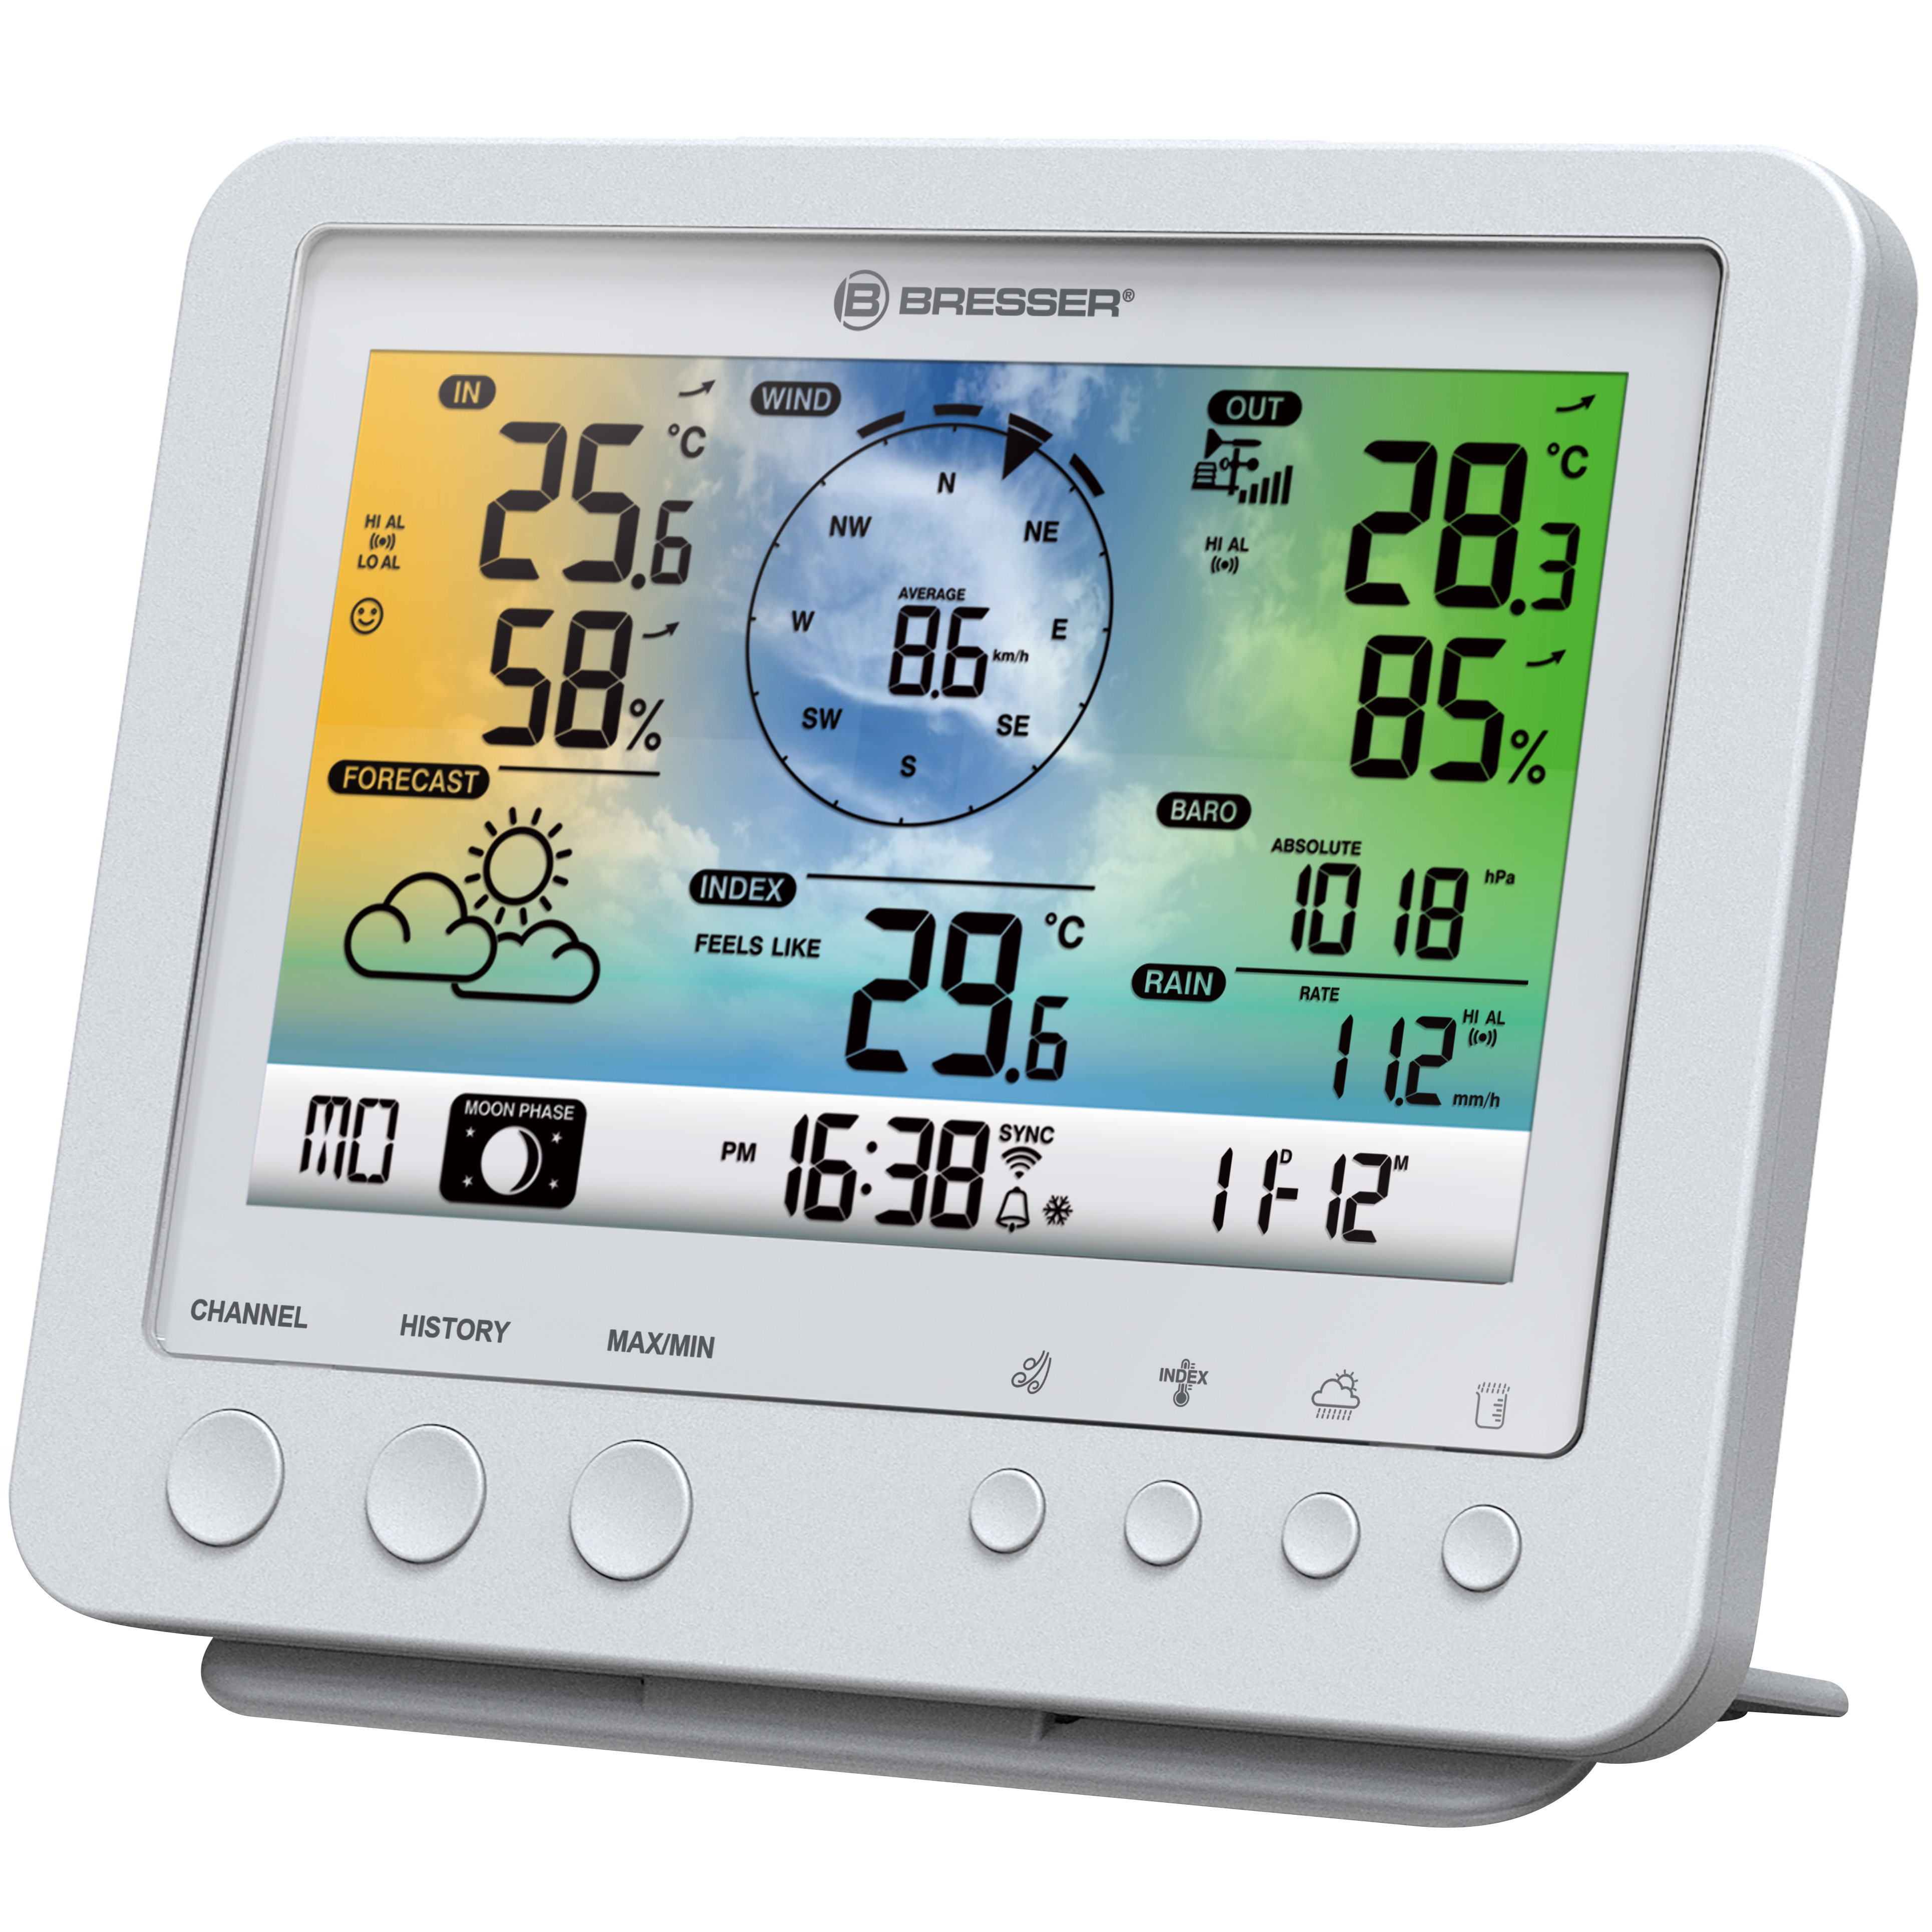 BRESSER Wi-Fi Colour Weather Station with 5-in-1 Professional Sensor, white